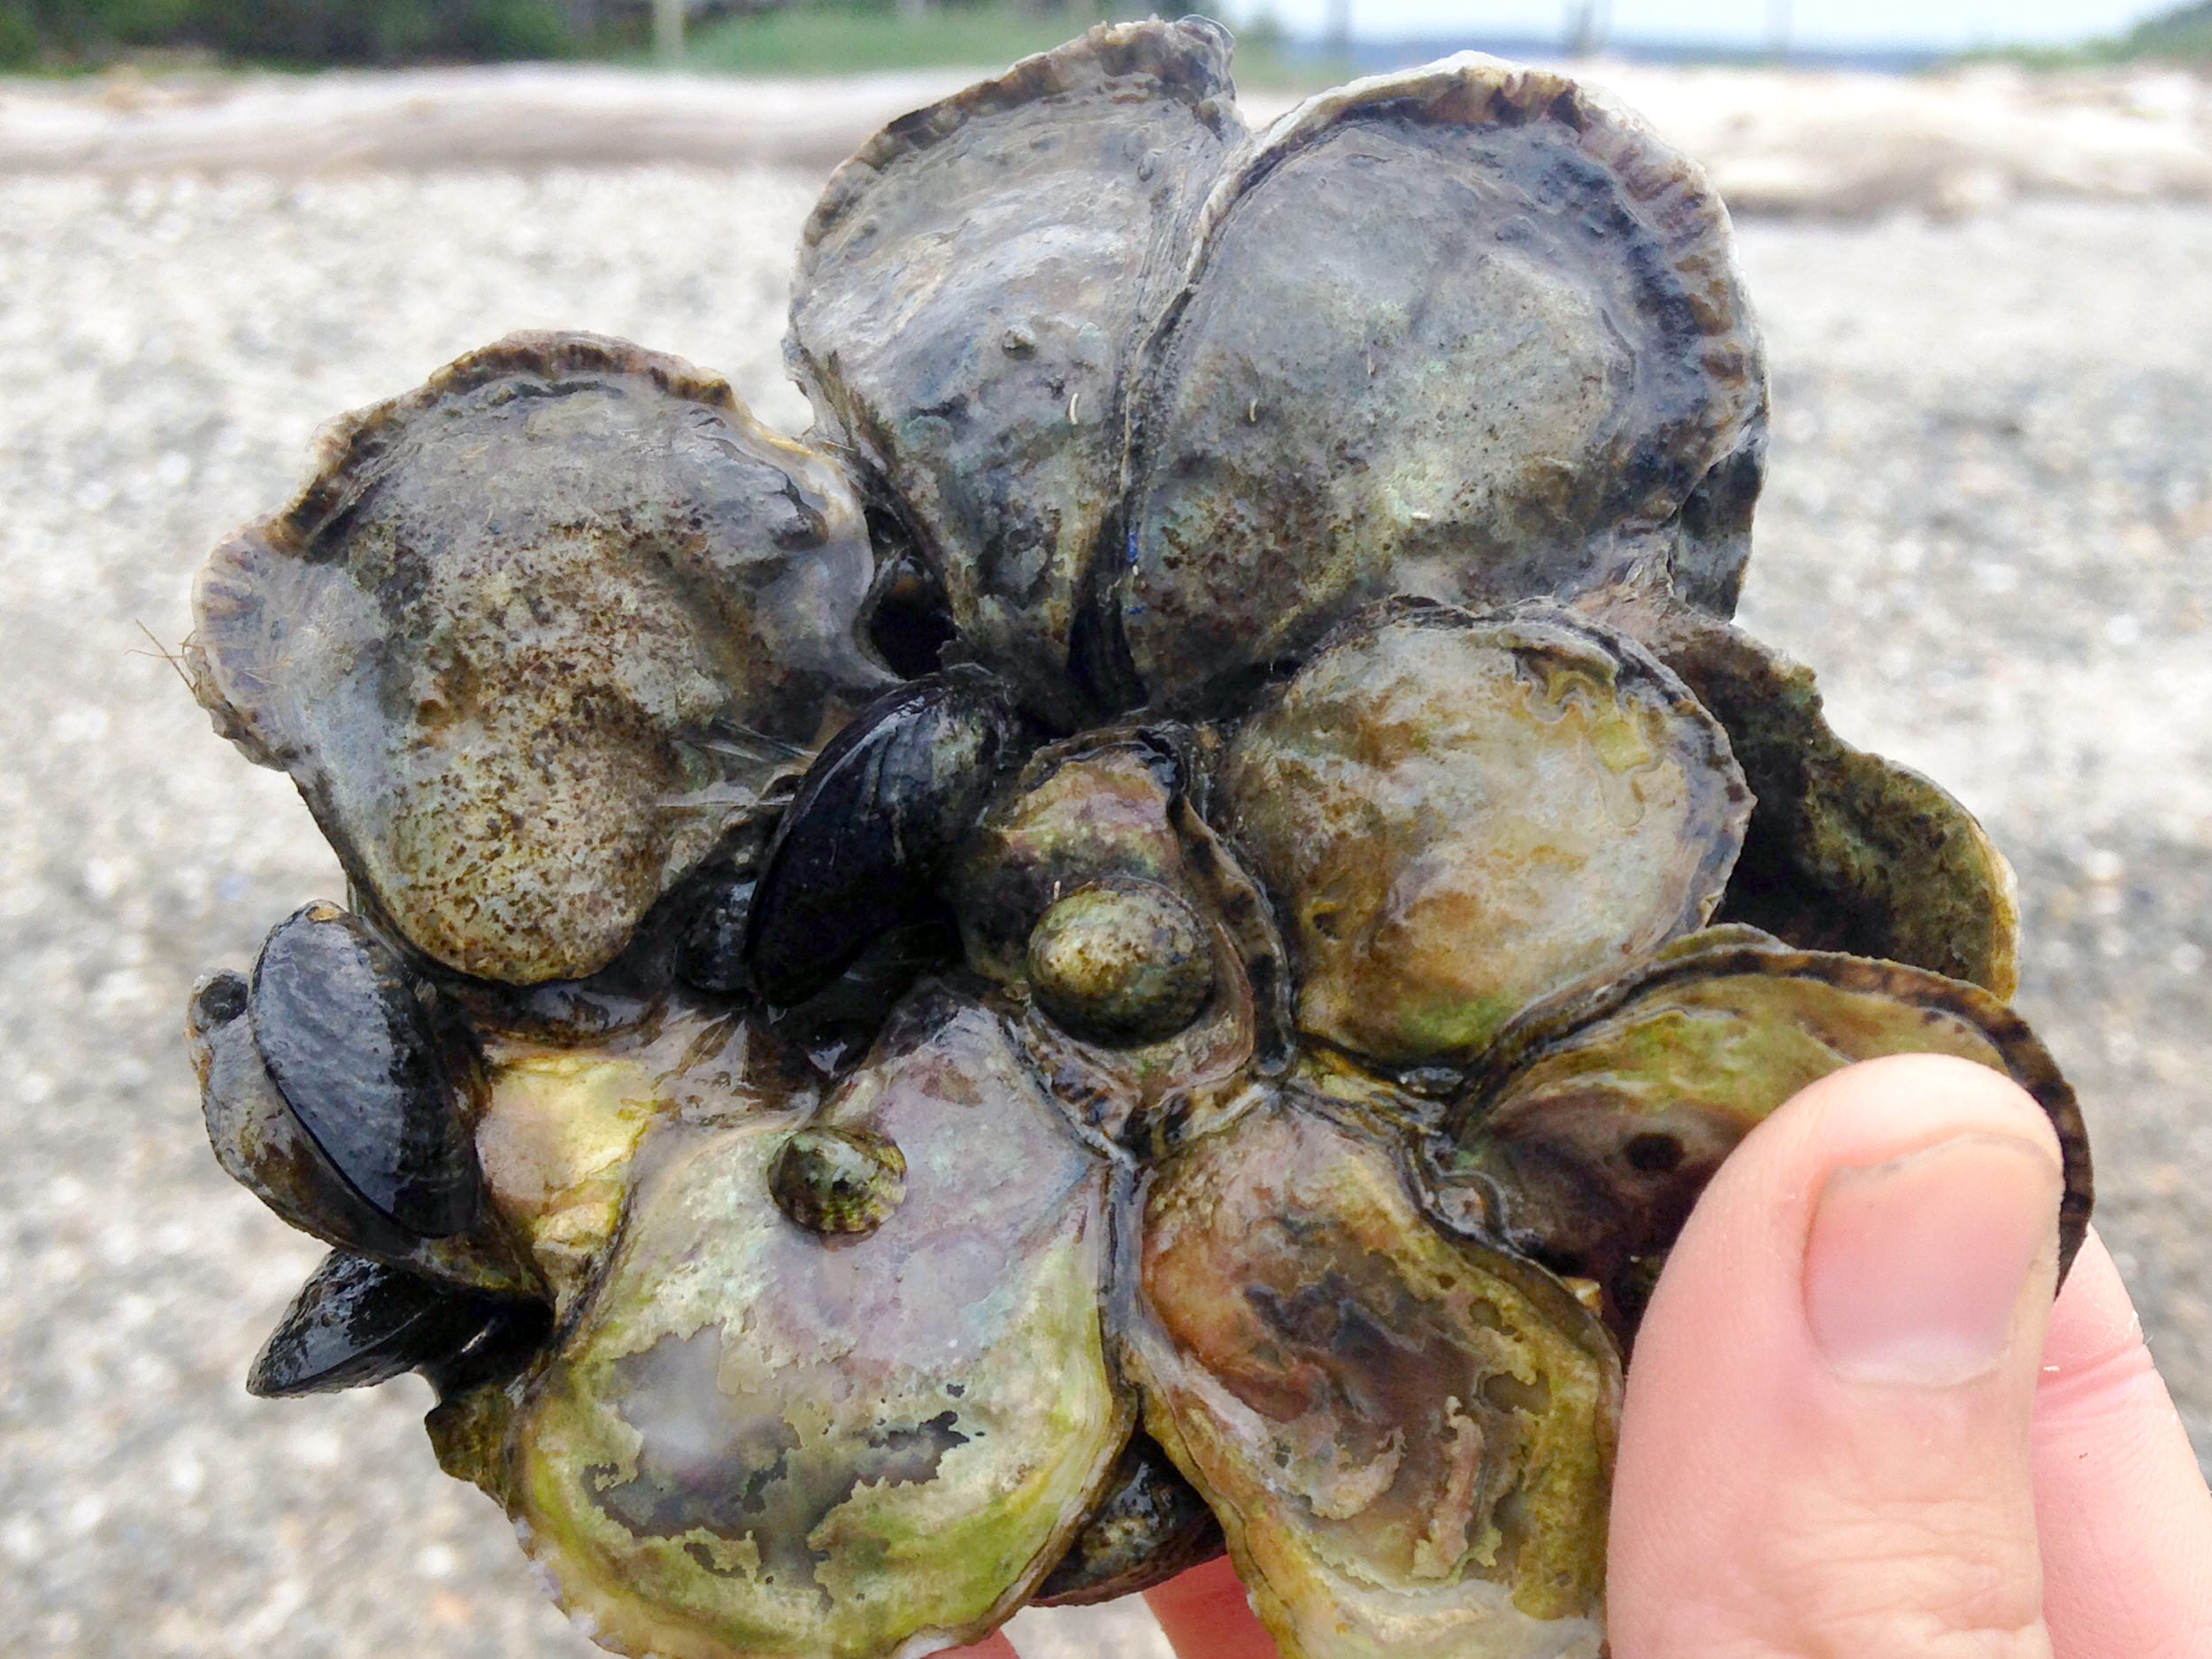  Adult Olympia oysters Photo: Swinomish Fisheries 